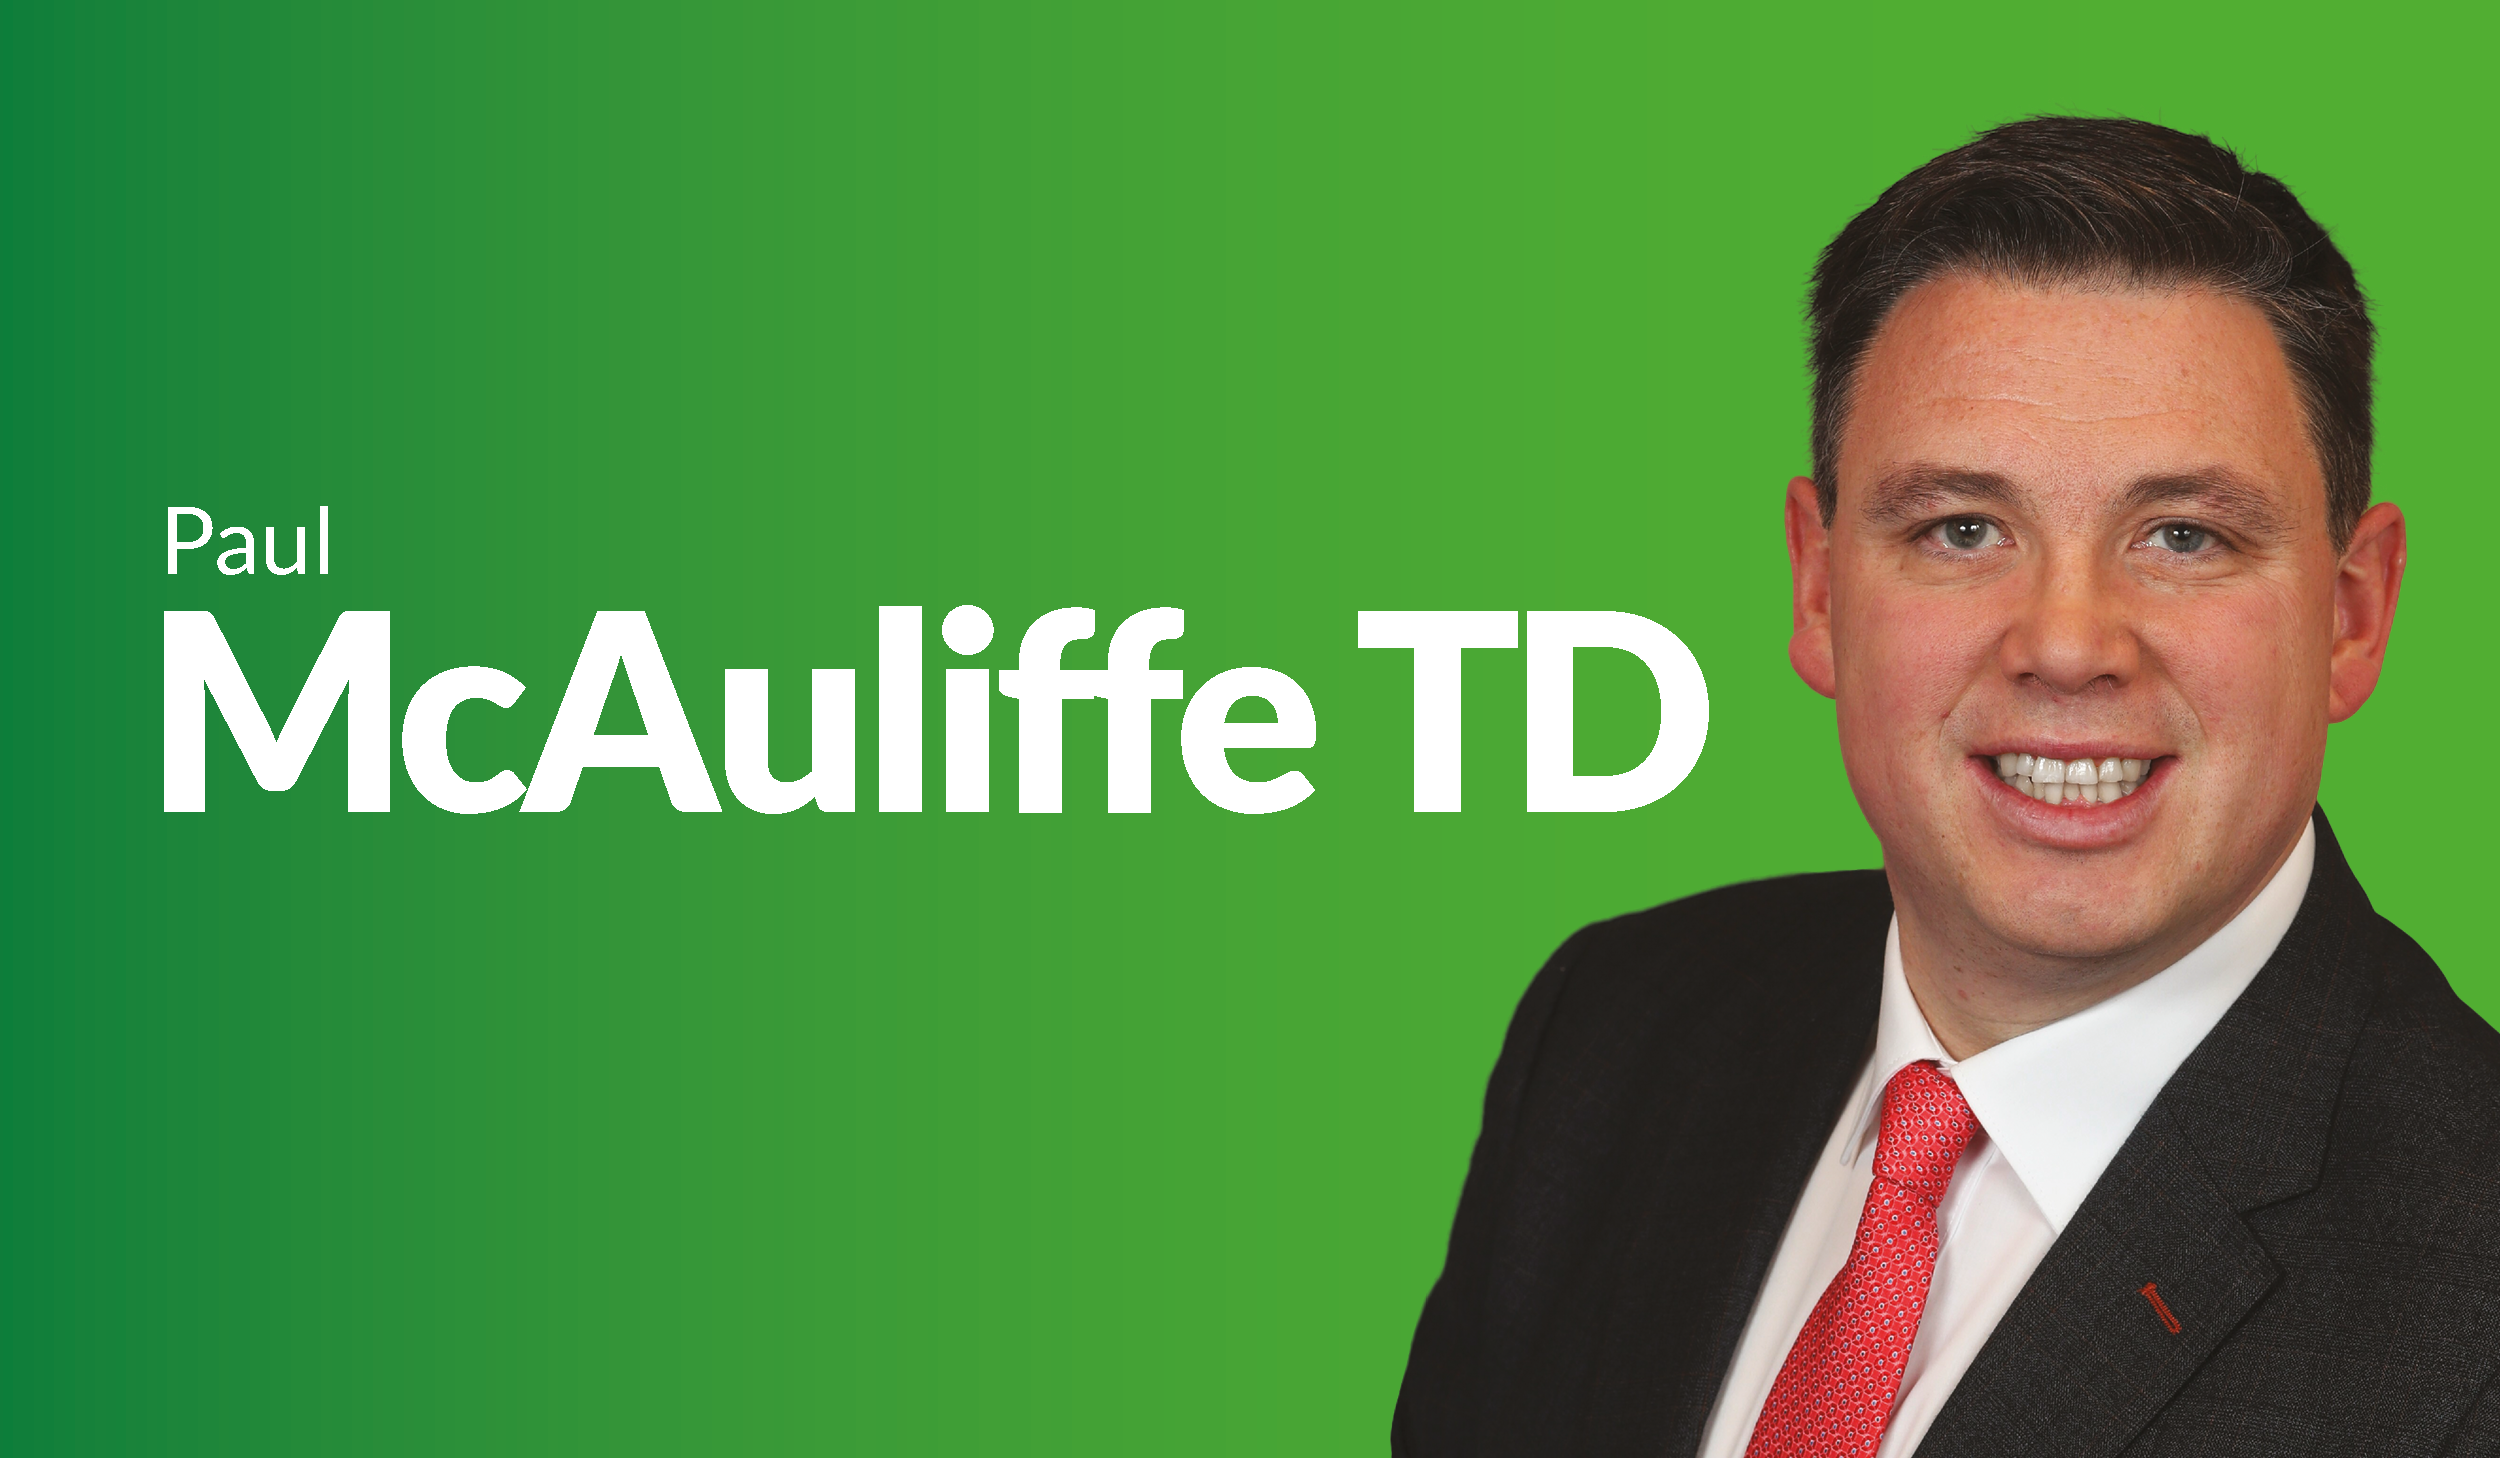 Dubliners to vote on directly elected mayor next year - McAuliffe